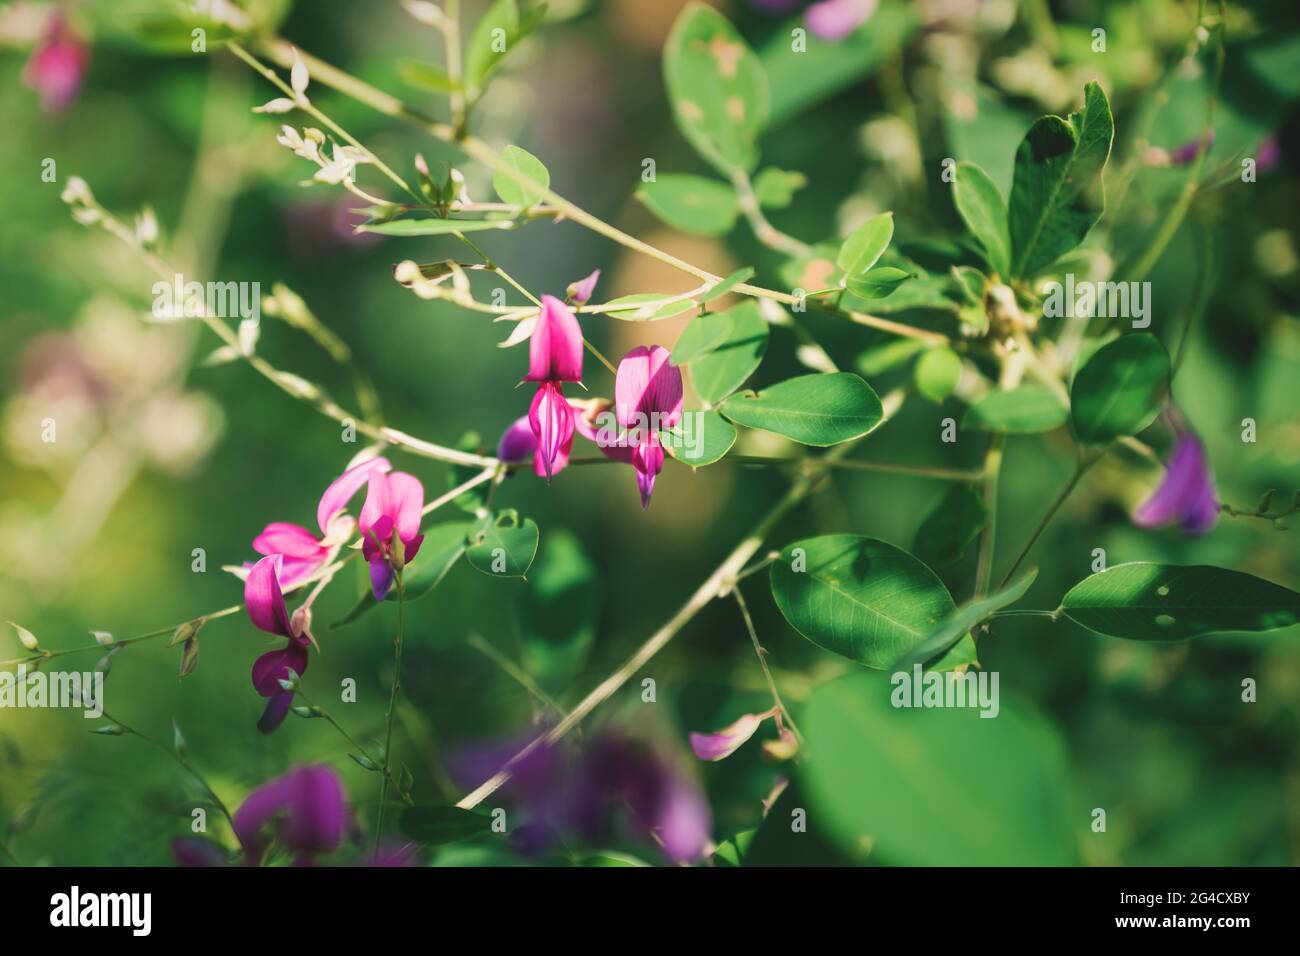 Closeup of purple violet blooming japanese bush clover flowers with the latin name Lespedeza in a zen garden in Kyoto, Japan Stock Photo